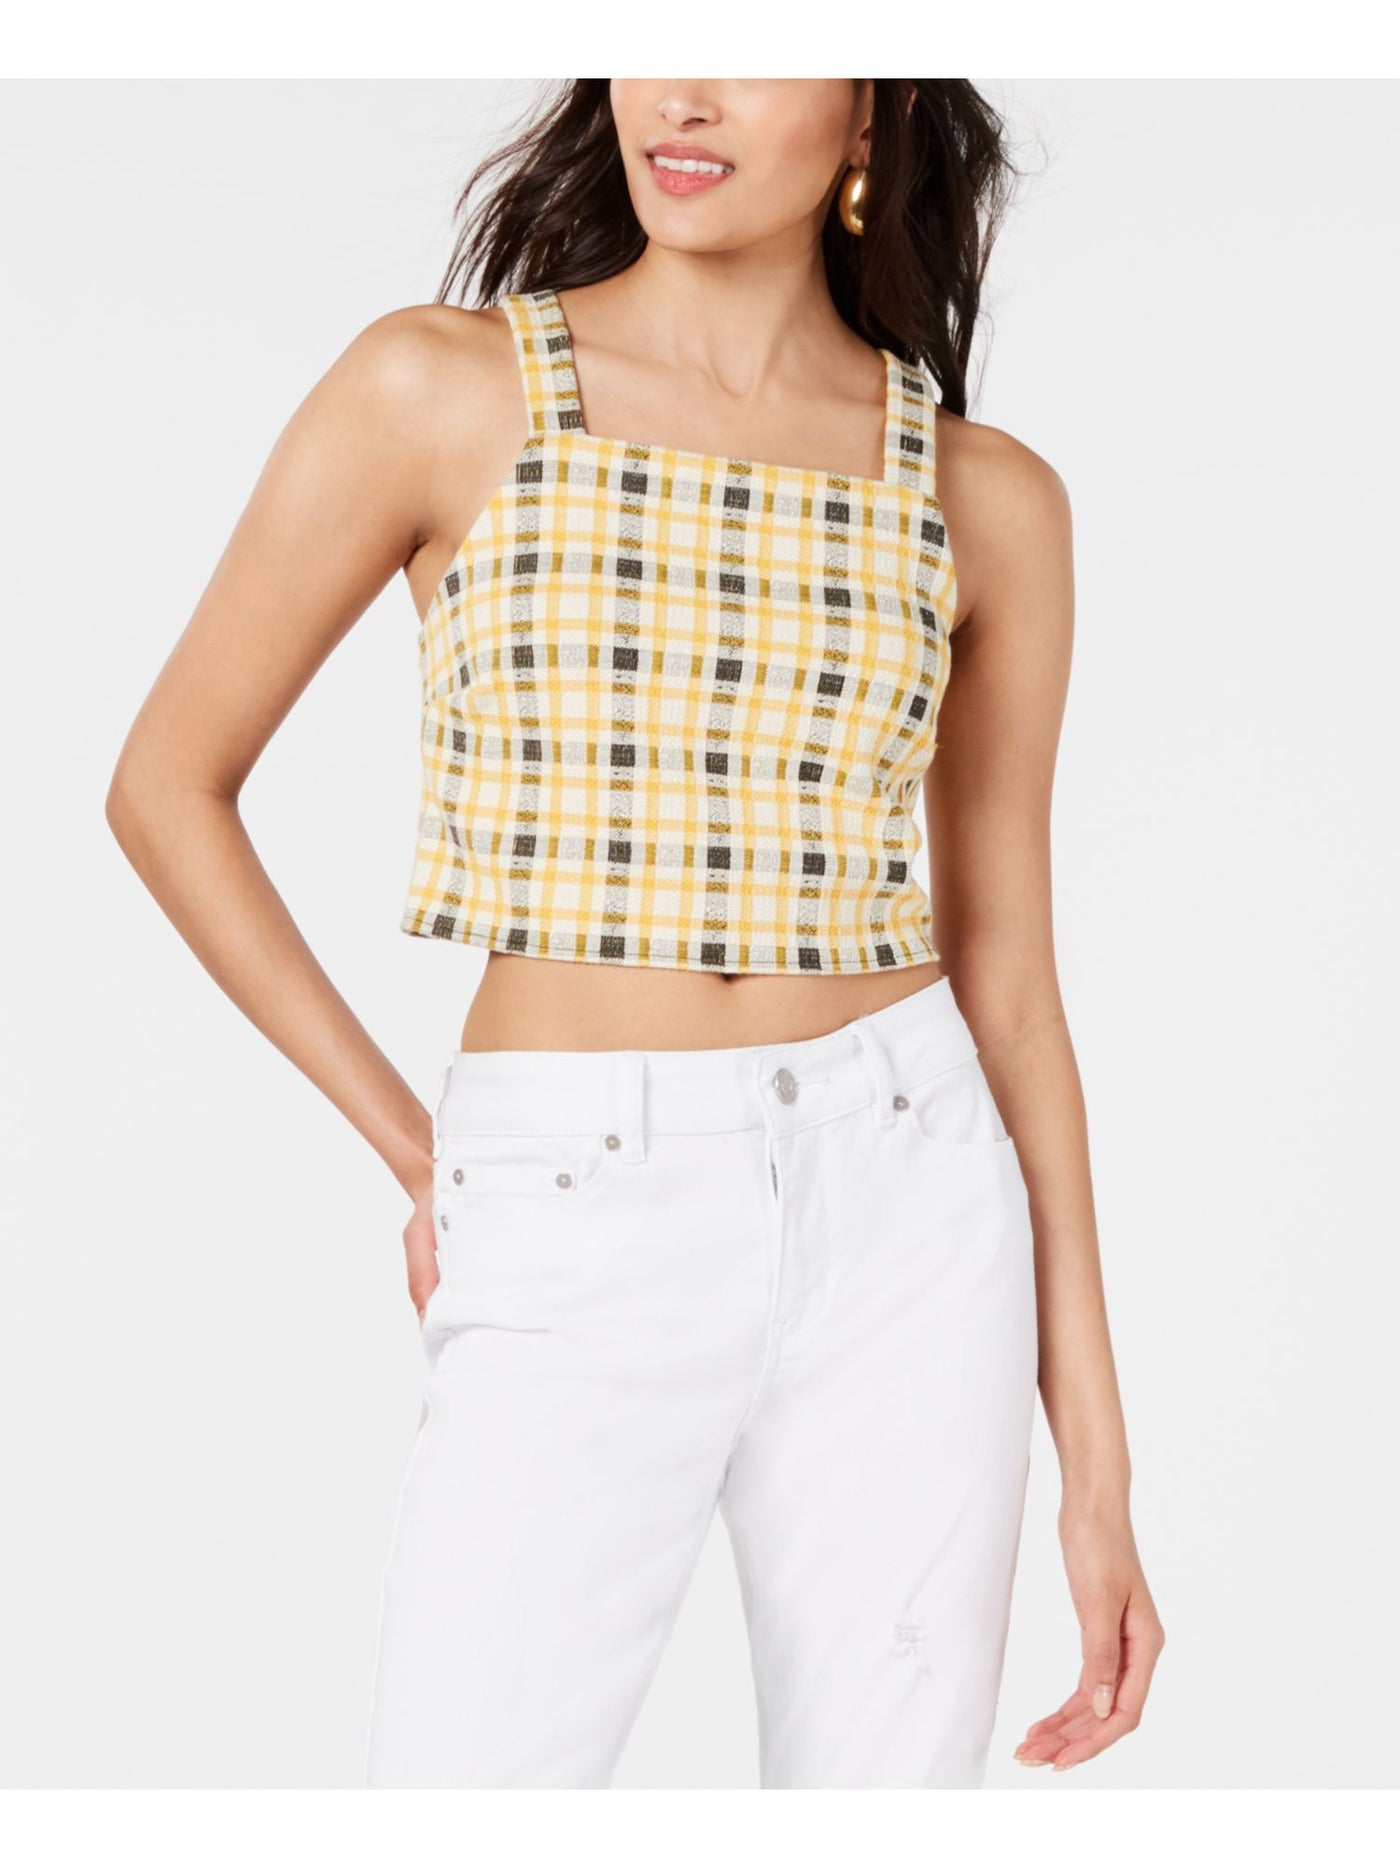 PROJECT 28 NYC Womens Yellow Check Sleeveless Square Neck Party Crop Top XL